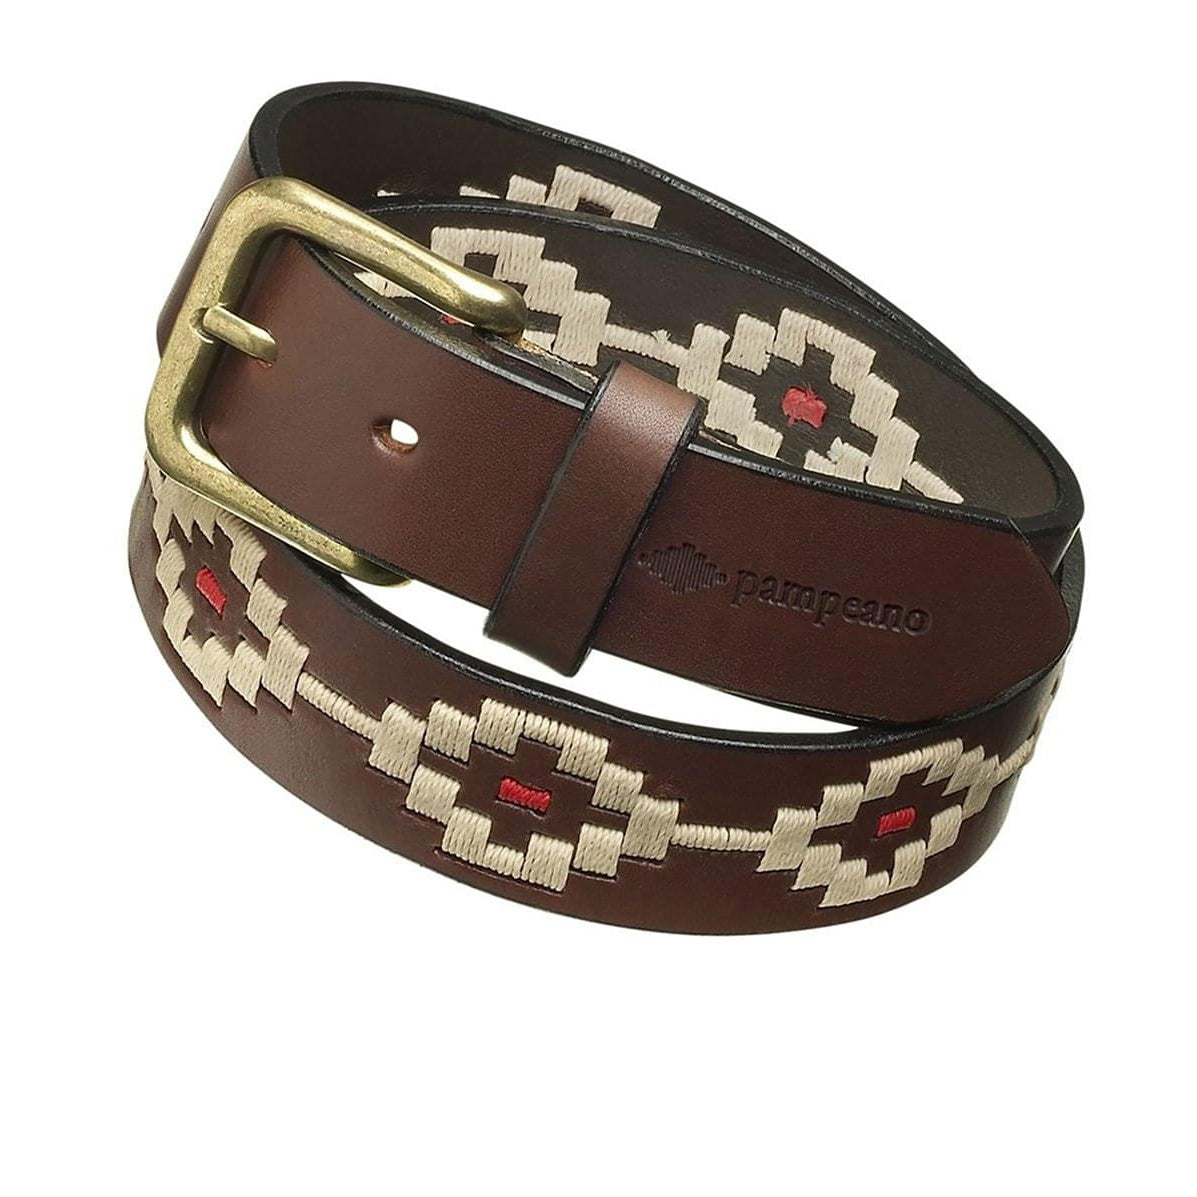 Pampeano Principe Polo Belt-MENS CLOTHING-Kevin's Fine Outdoor Gear & Apparel